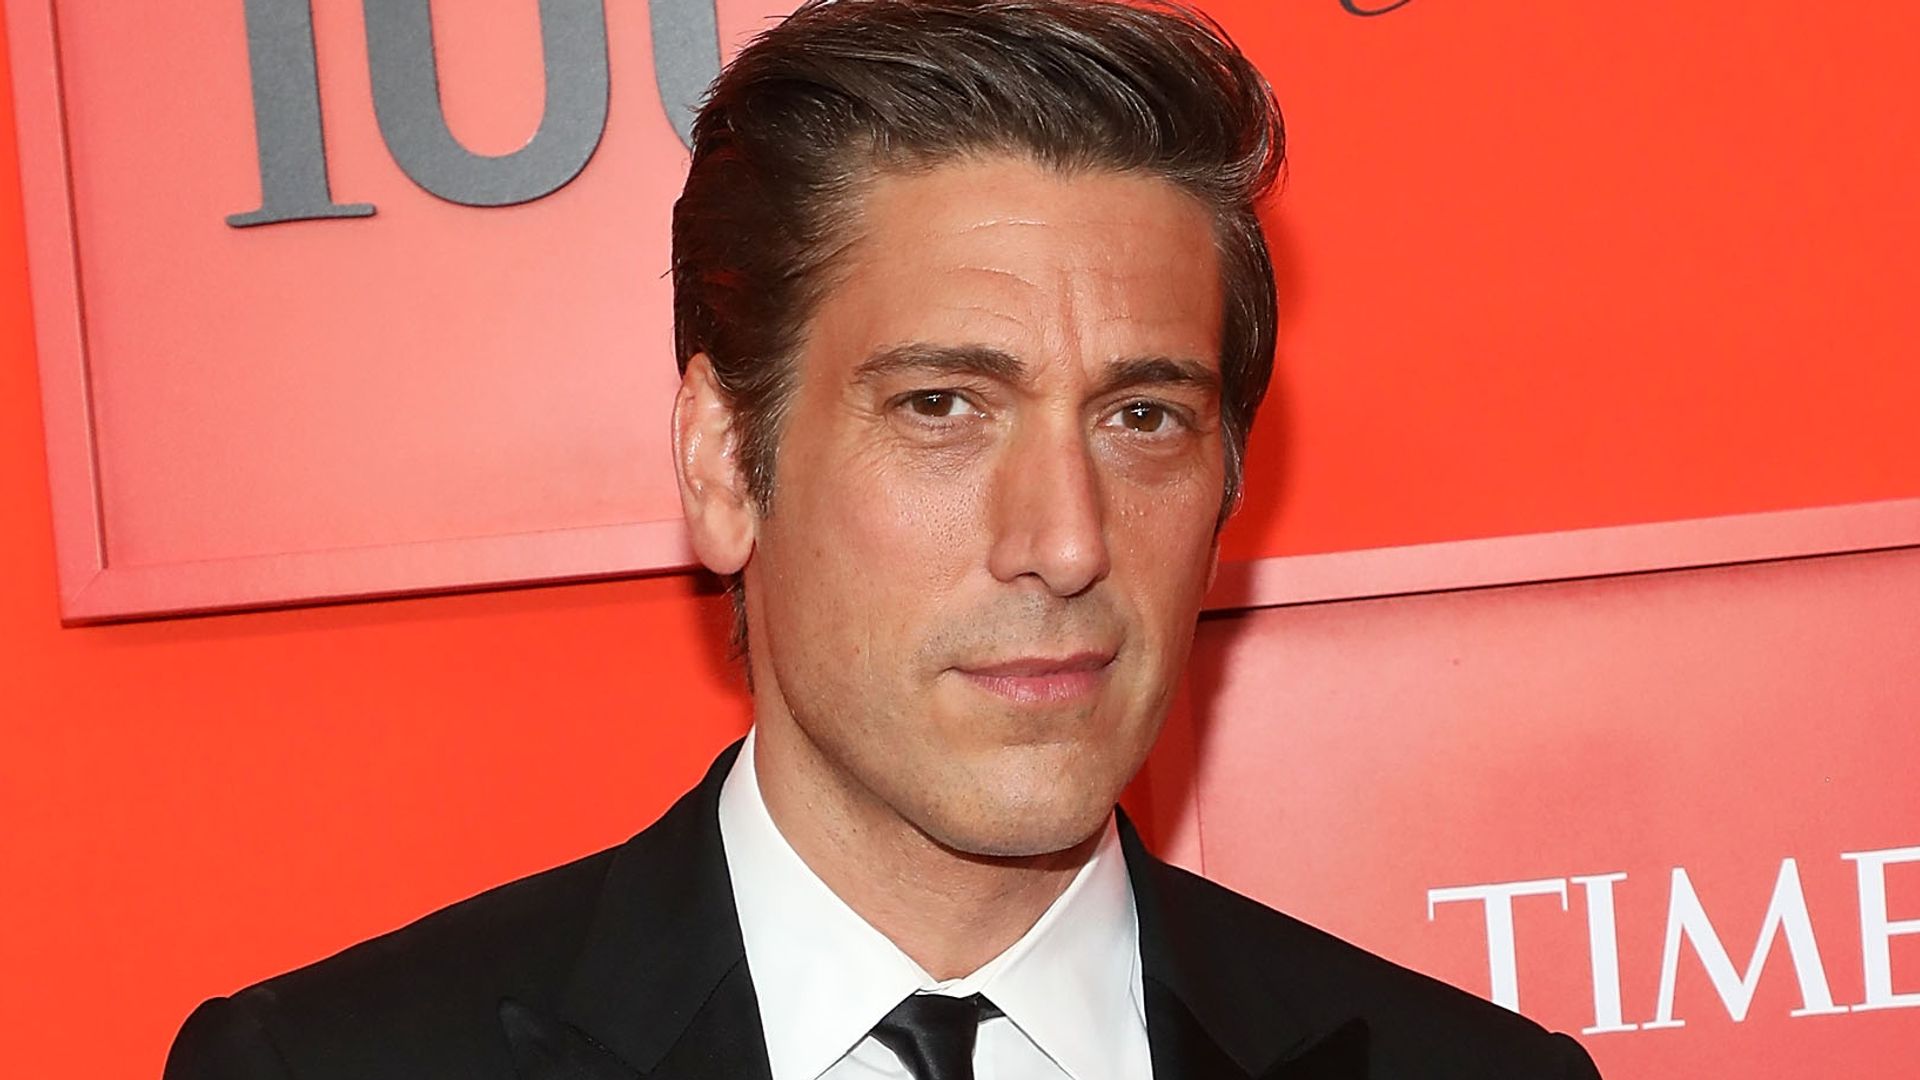 David Muir at Time 100 event in 2019